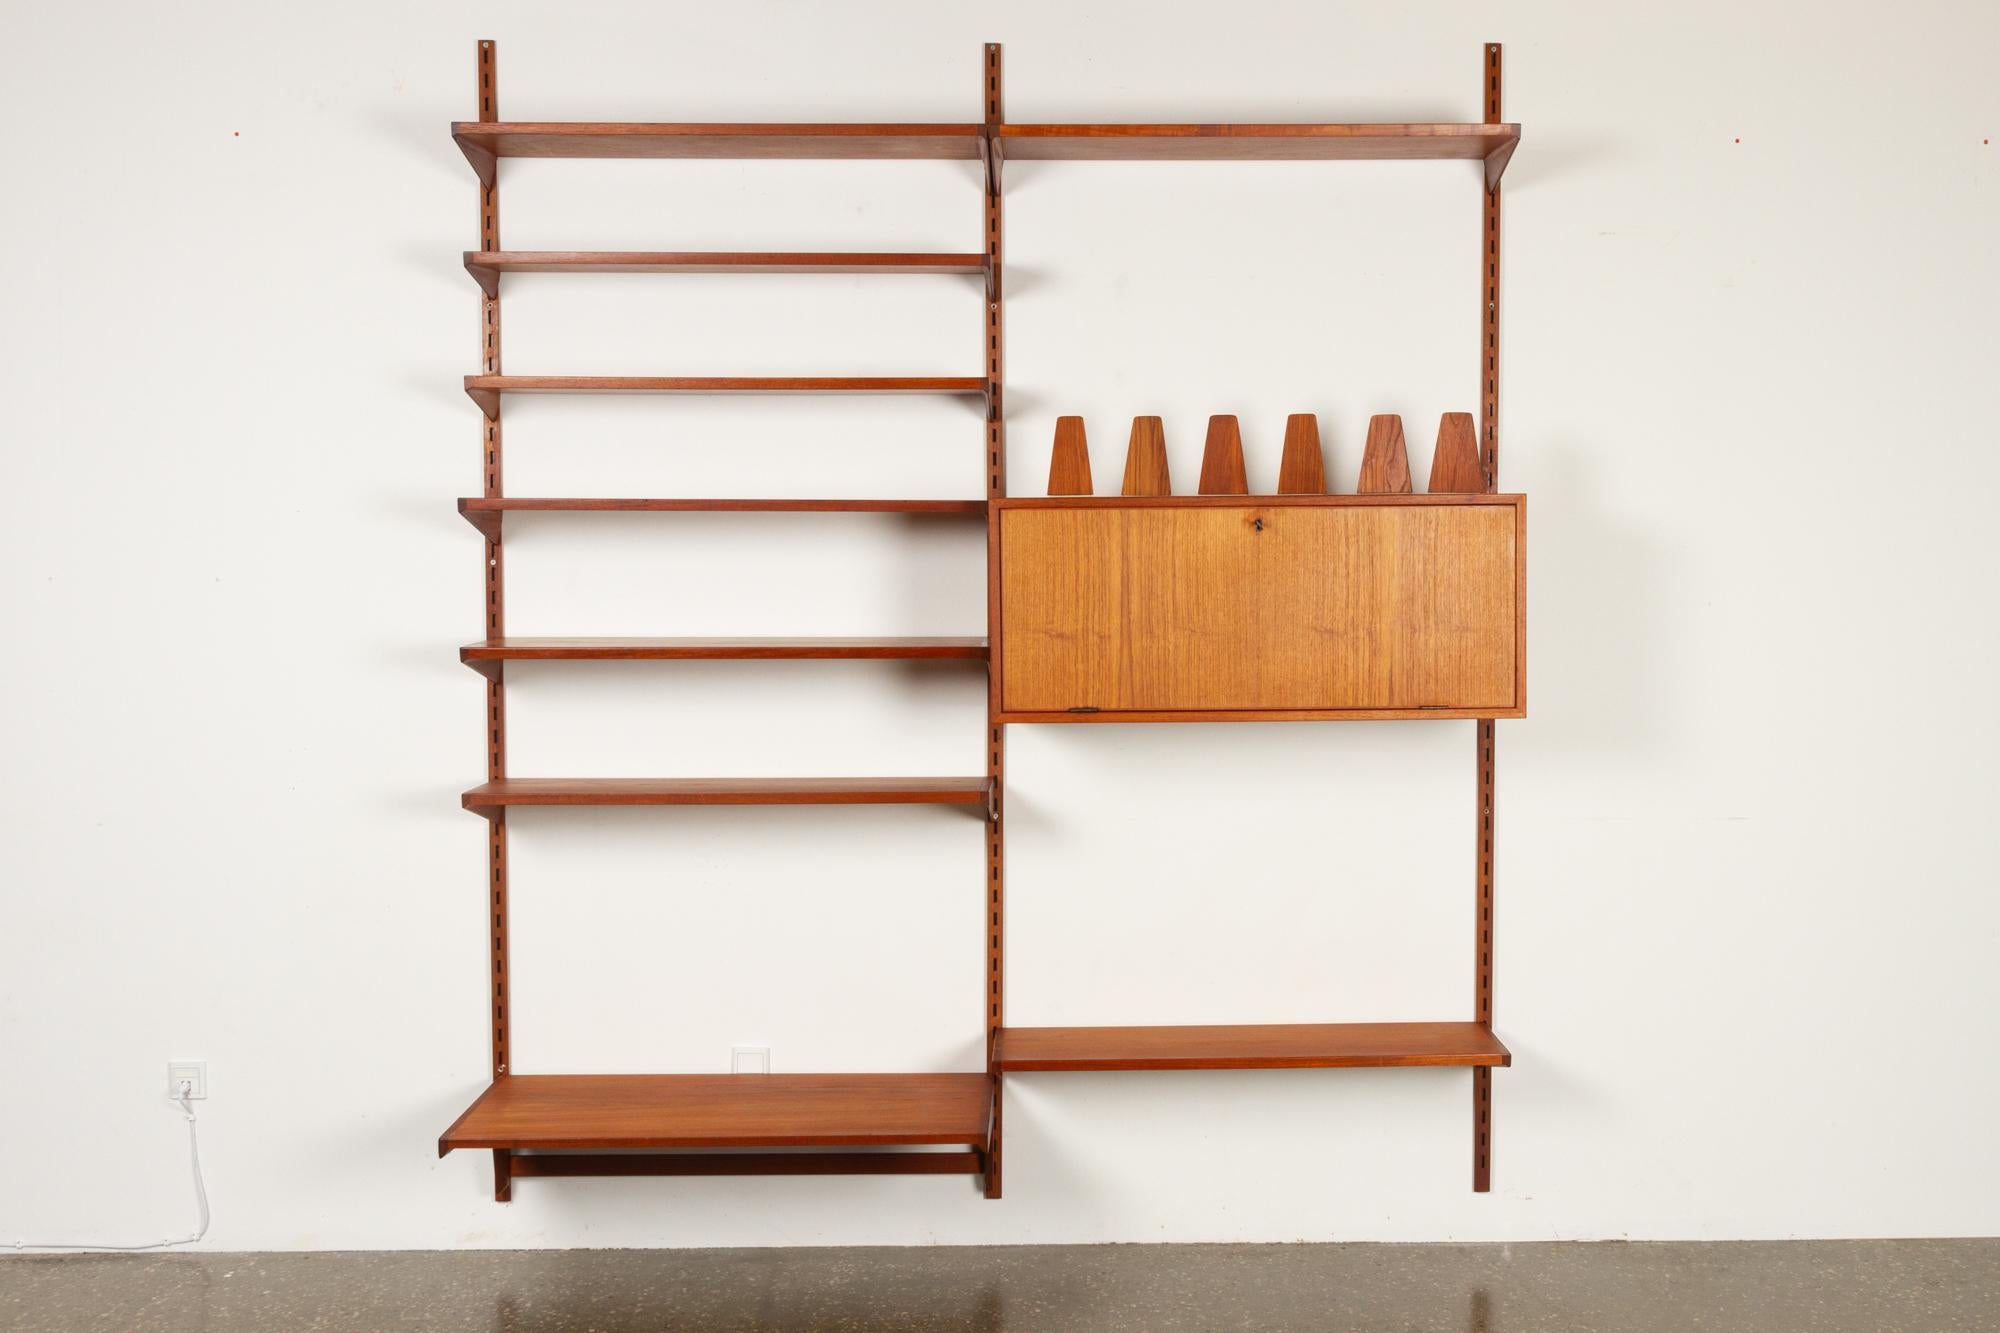 Vintage Danish modular teak wall unit by Kai Kristiansen for FM, 1960s
Teak wall unit by Kai Kristiansen for Feldballes Møbelfabrik, 1960s
Vintage modular shelving system model FM Reolsystem with two sections. This set consist of:
Measures: 3